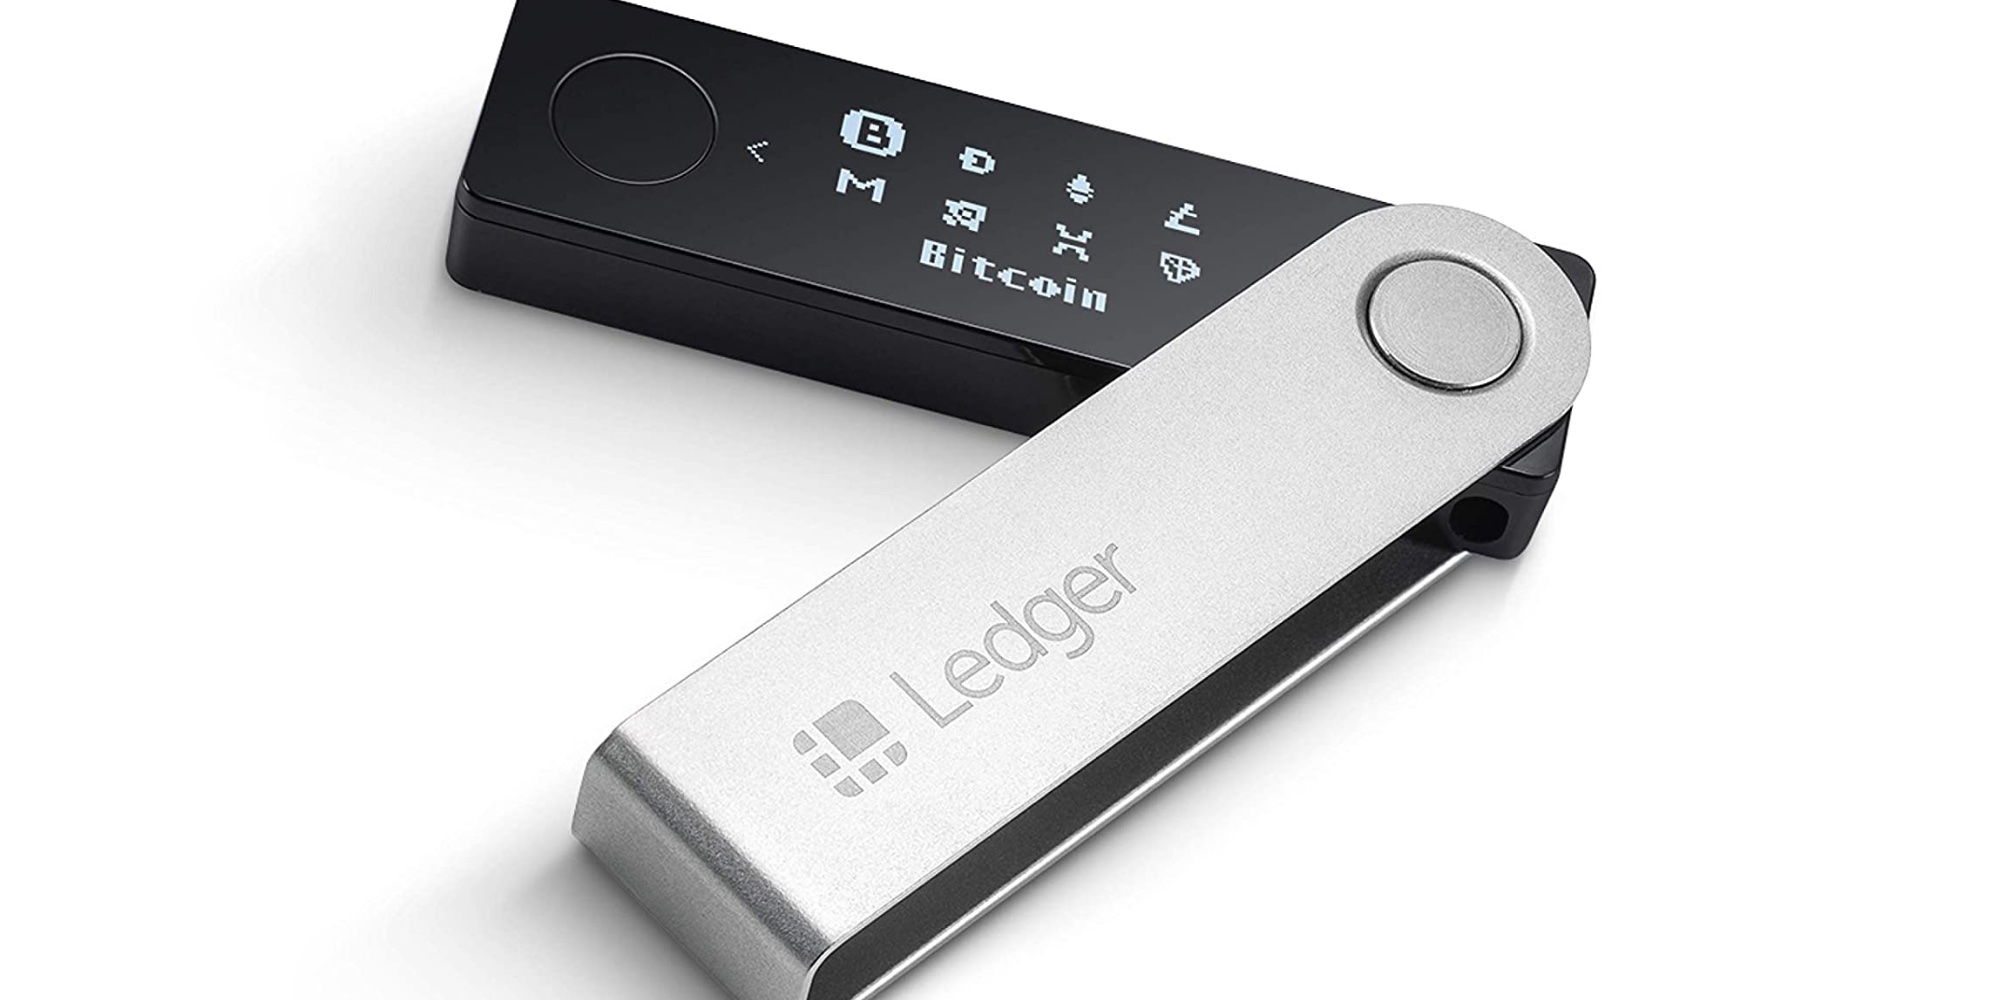 Get serious about crypto with up to 25% off Ledger&#39;s hardware wallets from $40 - 9to5Toys